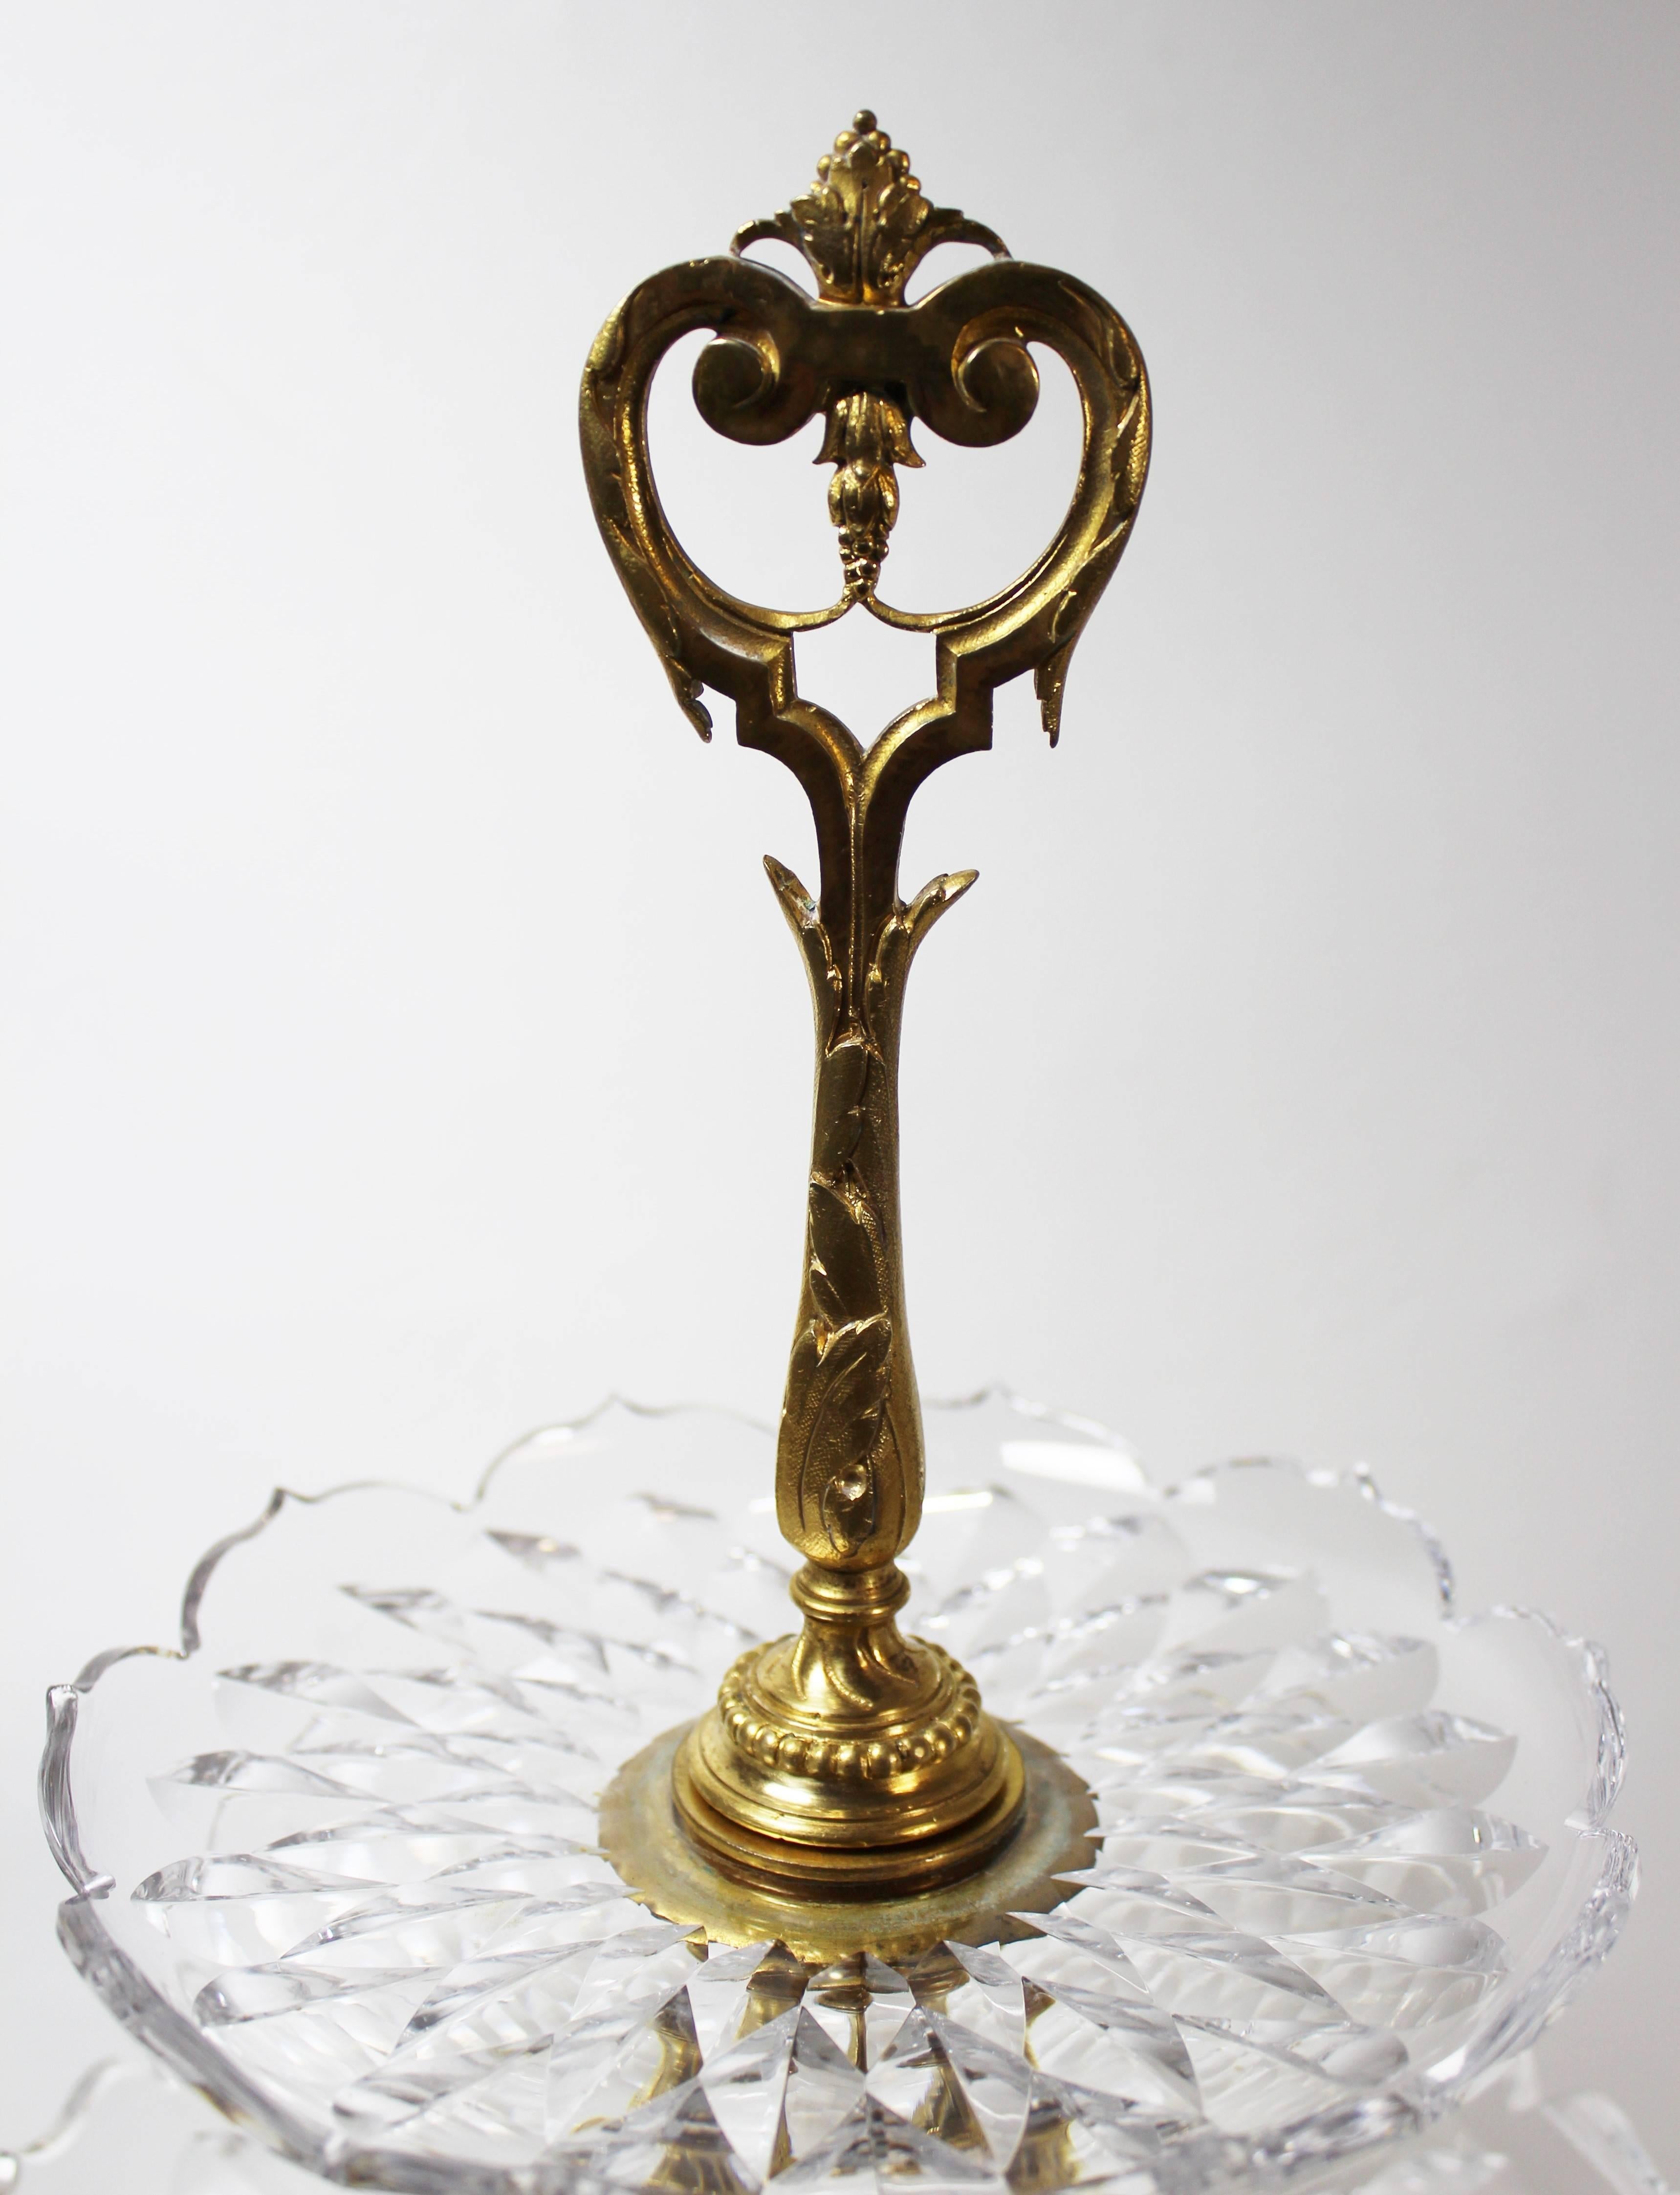 19th Century French Gilt Bronze & Cut Crystal Two-Tier Surtout De Table or Centerpiece Tazza For Sale